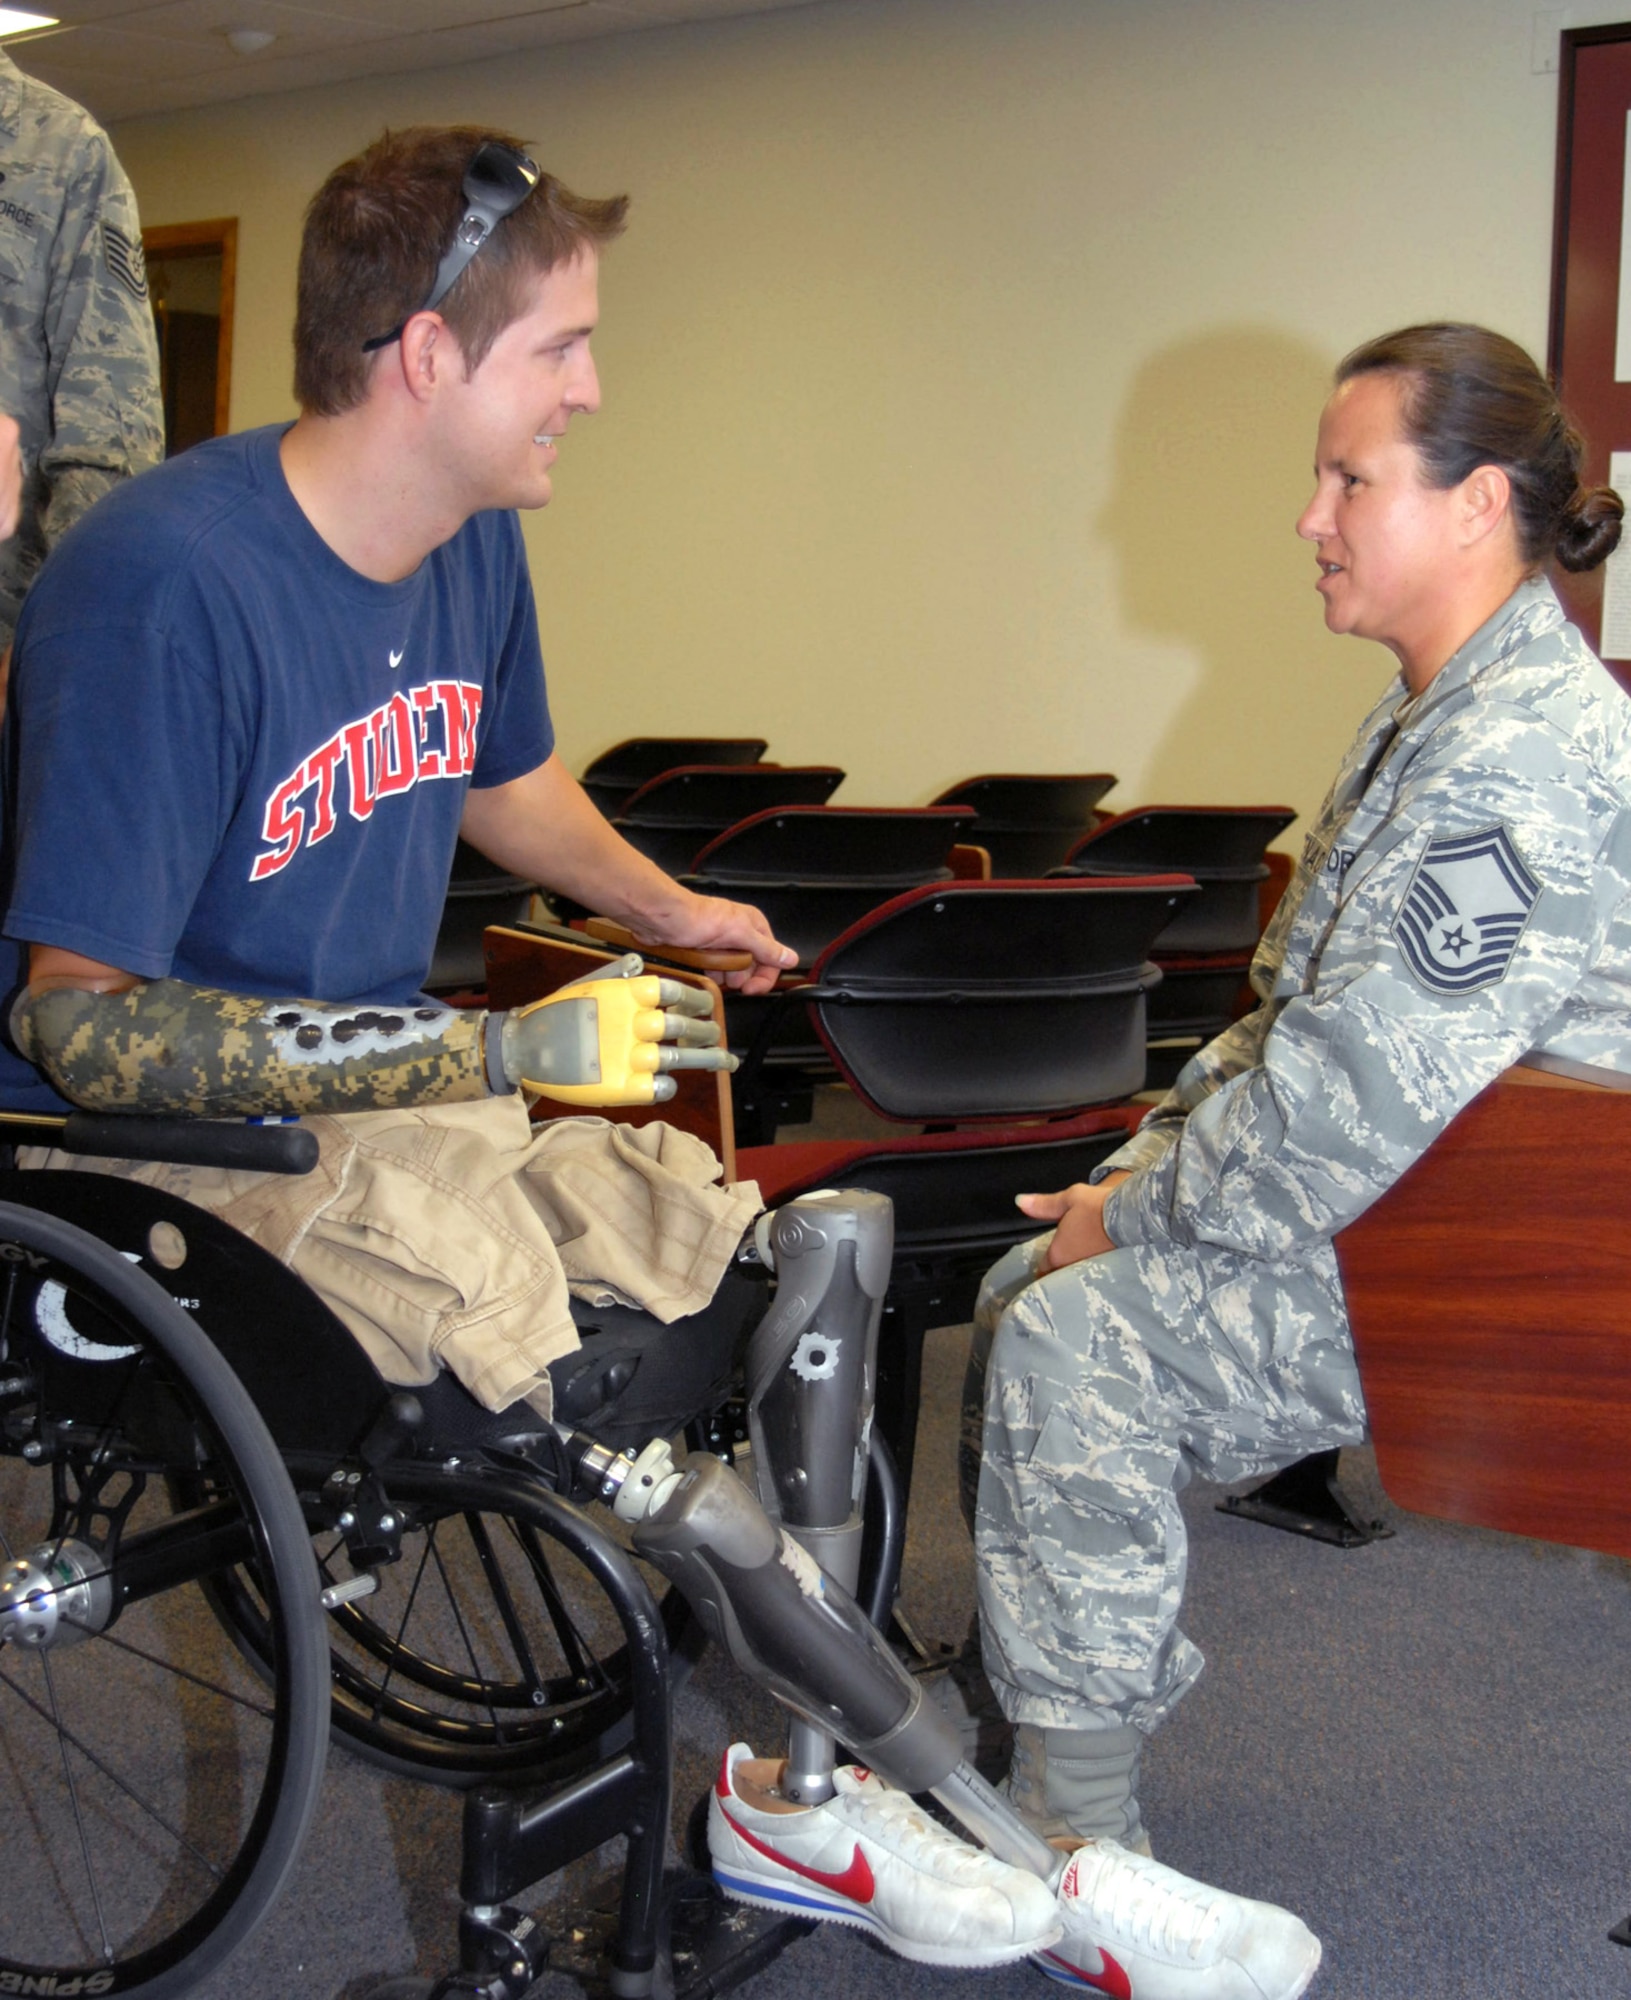 Brian Kolfage Jr. speaks to Senior Master Sgt. Annette Whitenack July 2 at Goodfellow Air Force Base, Texas. Mr. Kolfage spoke about his experience on Sept. 11, 2004, when a rocket attack left him without legs and a right arm. Sergeant Whitenack was one of the first medical responders on scene after he was injured. Mr. Kolfage is a former 17th Security Forces Squadron defender and now a retired senior airman. (U.S. Air Force photo/Robert D. Martinez)